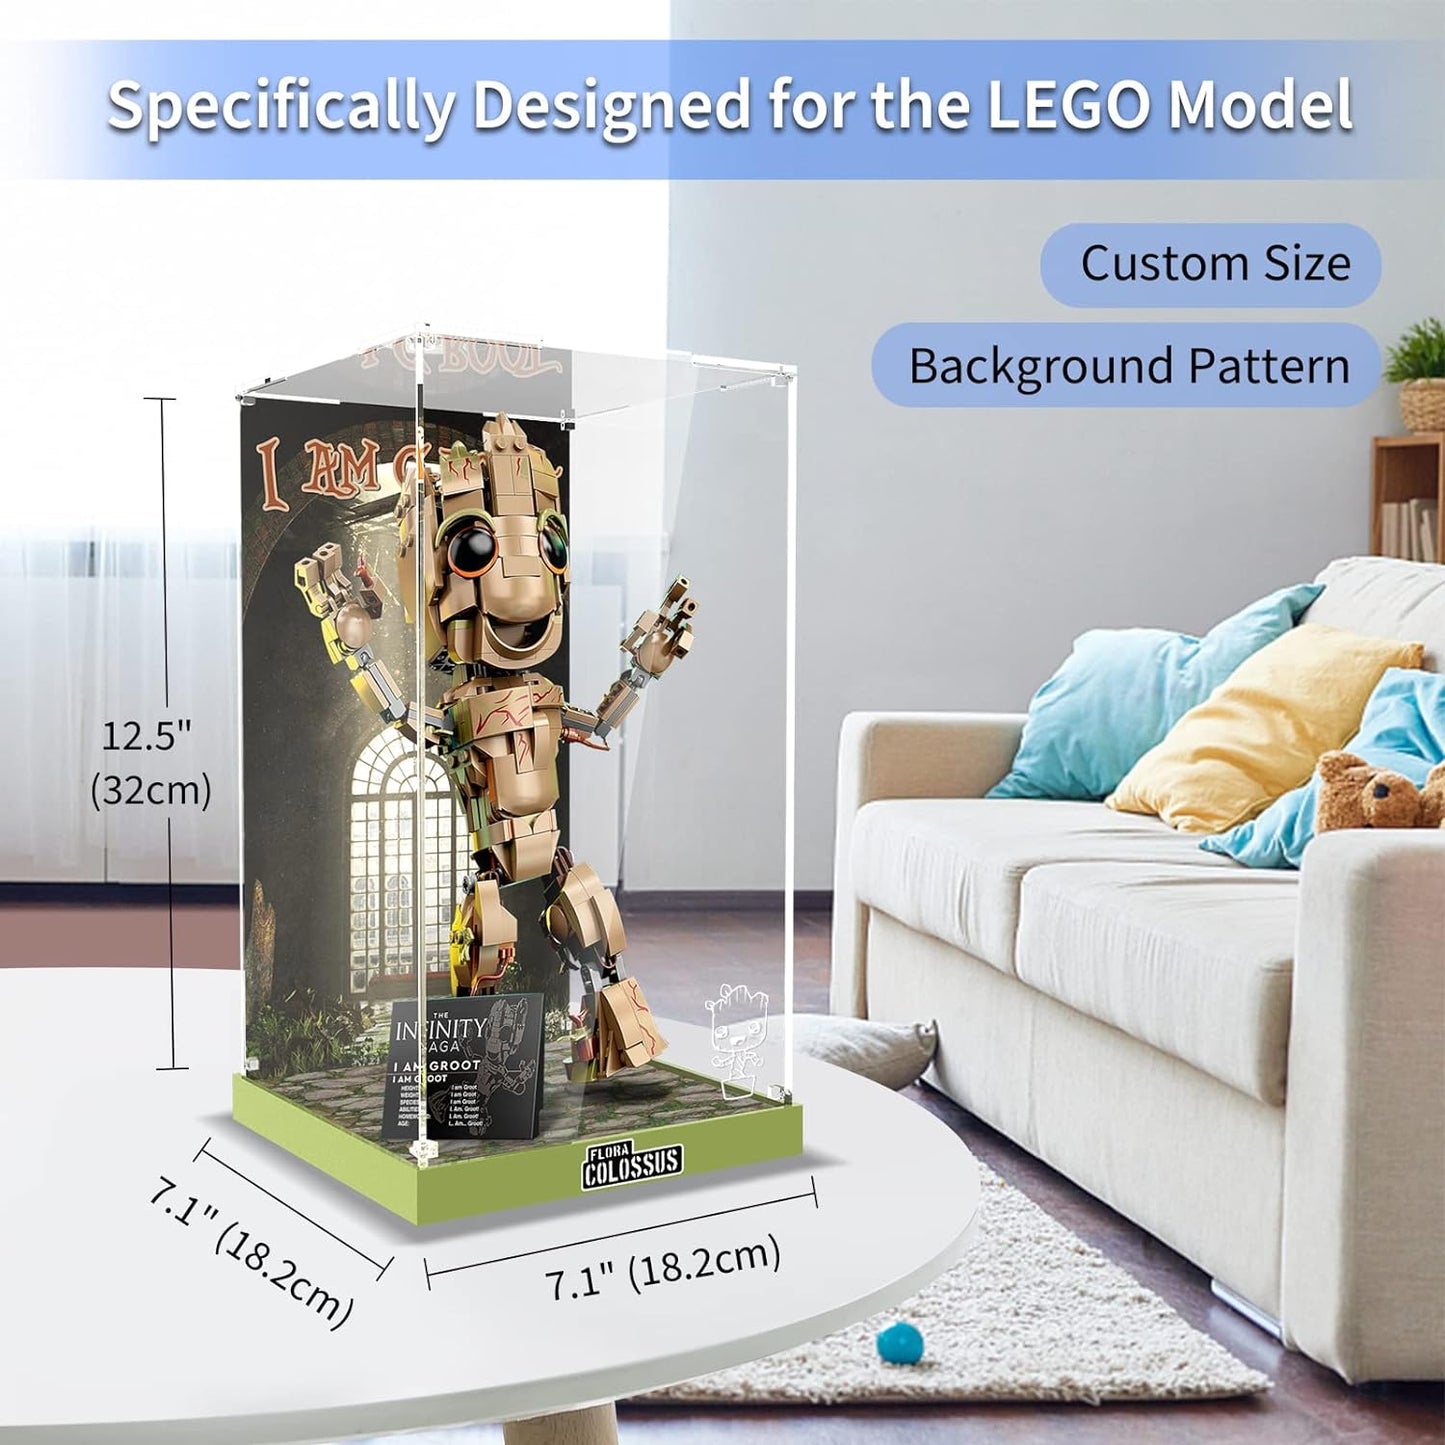 Acrylic Display Case for Lego 76249 Marvel Venomized Groot or Lego 76217 Marvel I am Groot, Dustproof Clear Display Box Showcase (Lego Set NOT Included)